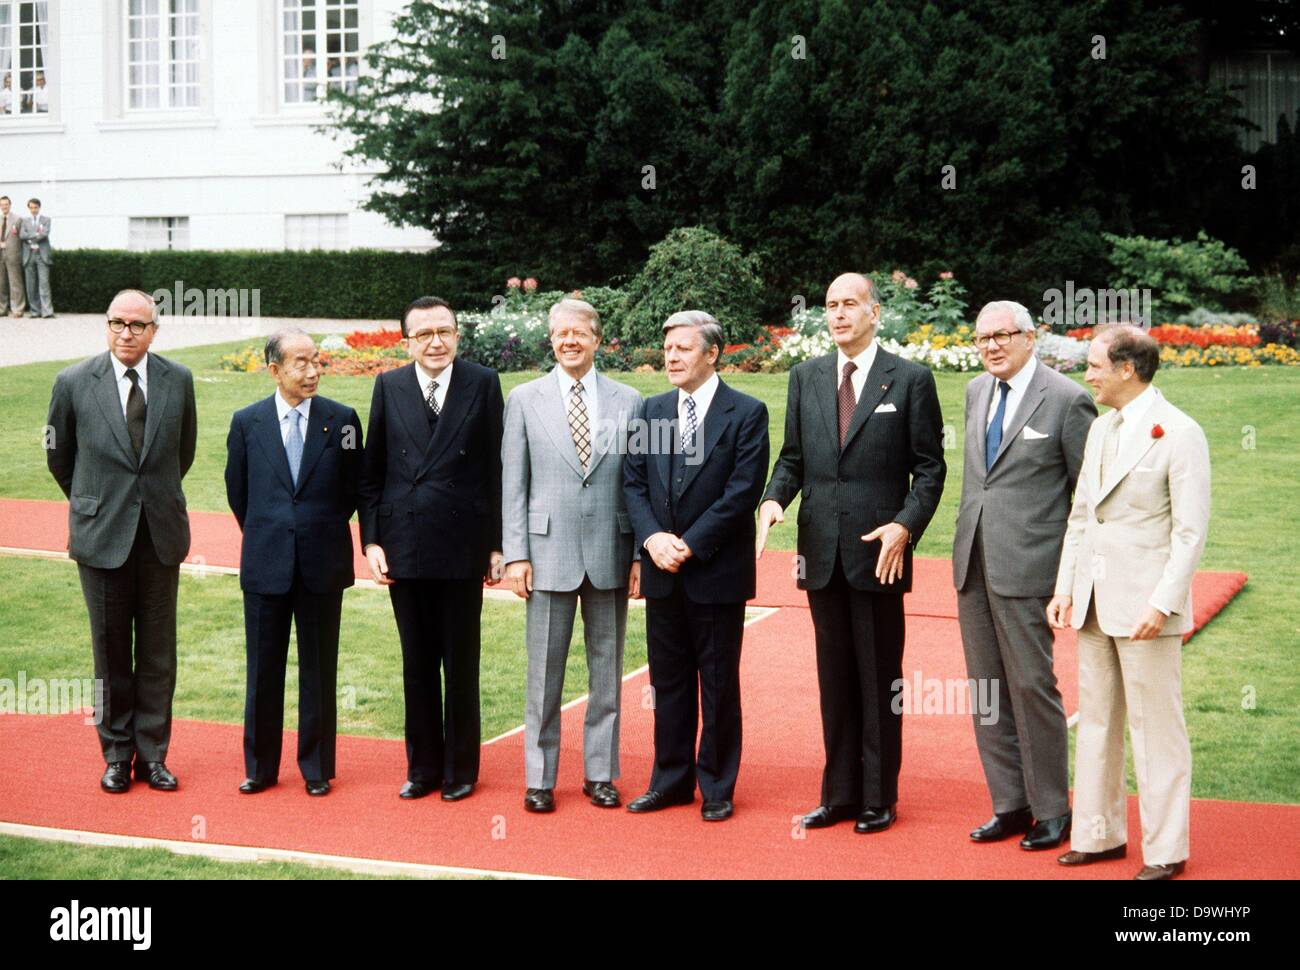 Group picture of state presidents and heads of government of the seven leading western industrial nations on the 16th of July in 1978: (l-r) president of the EG commission Roy Jenkins, Japanese minister president Takeo Fukuda, Italian minister president Giulio Andreotti, US president Jimmy Carter, German chancellor Helmut Schmidt, French state president Valery Giscard d'Estaing, British prime minister James Callaghan and Canadian prime minister Pierre Trudeau. Stock Photo